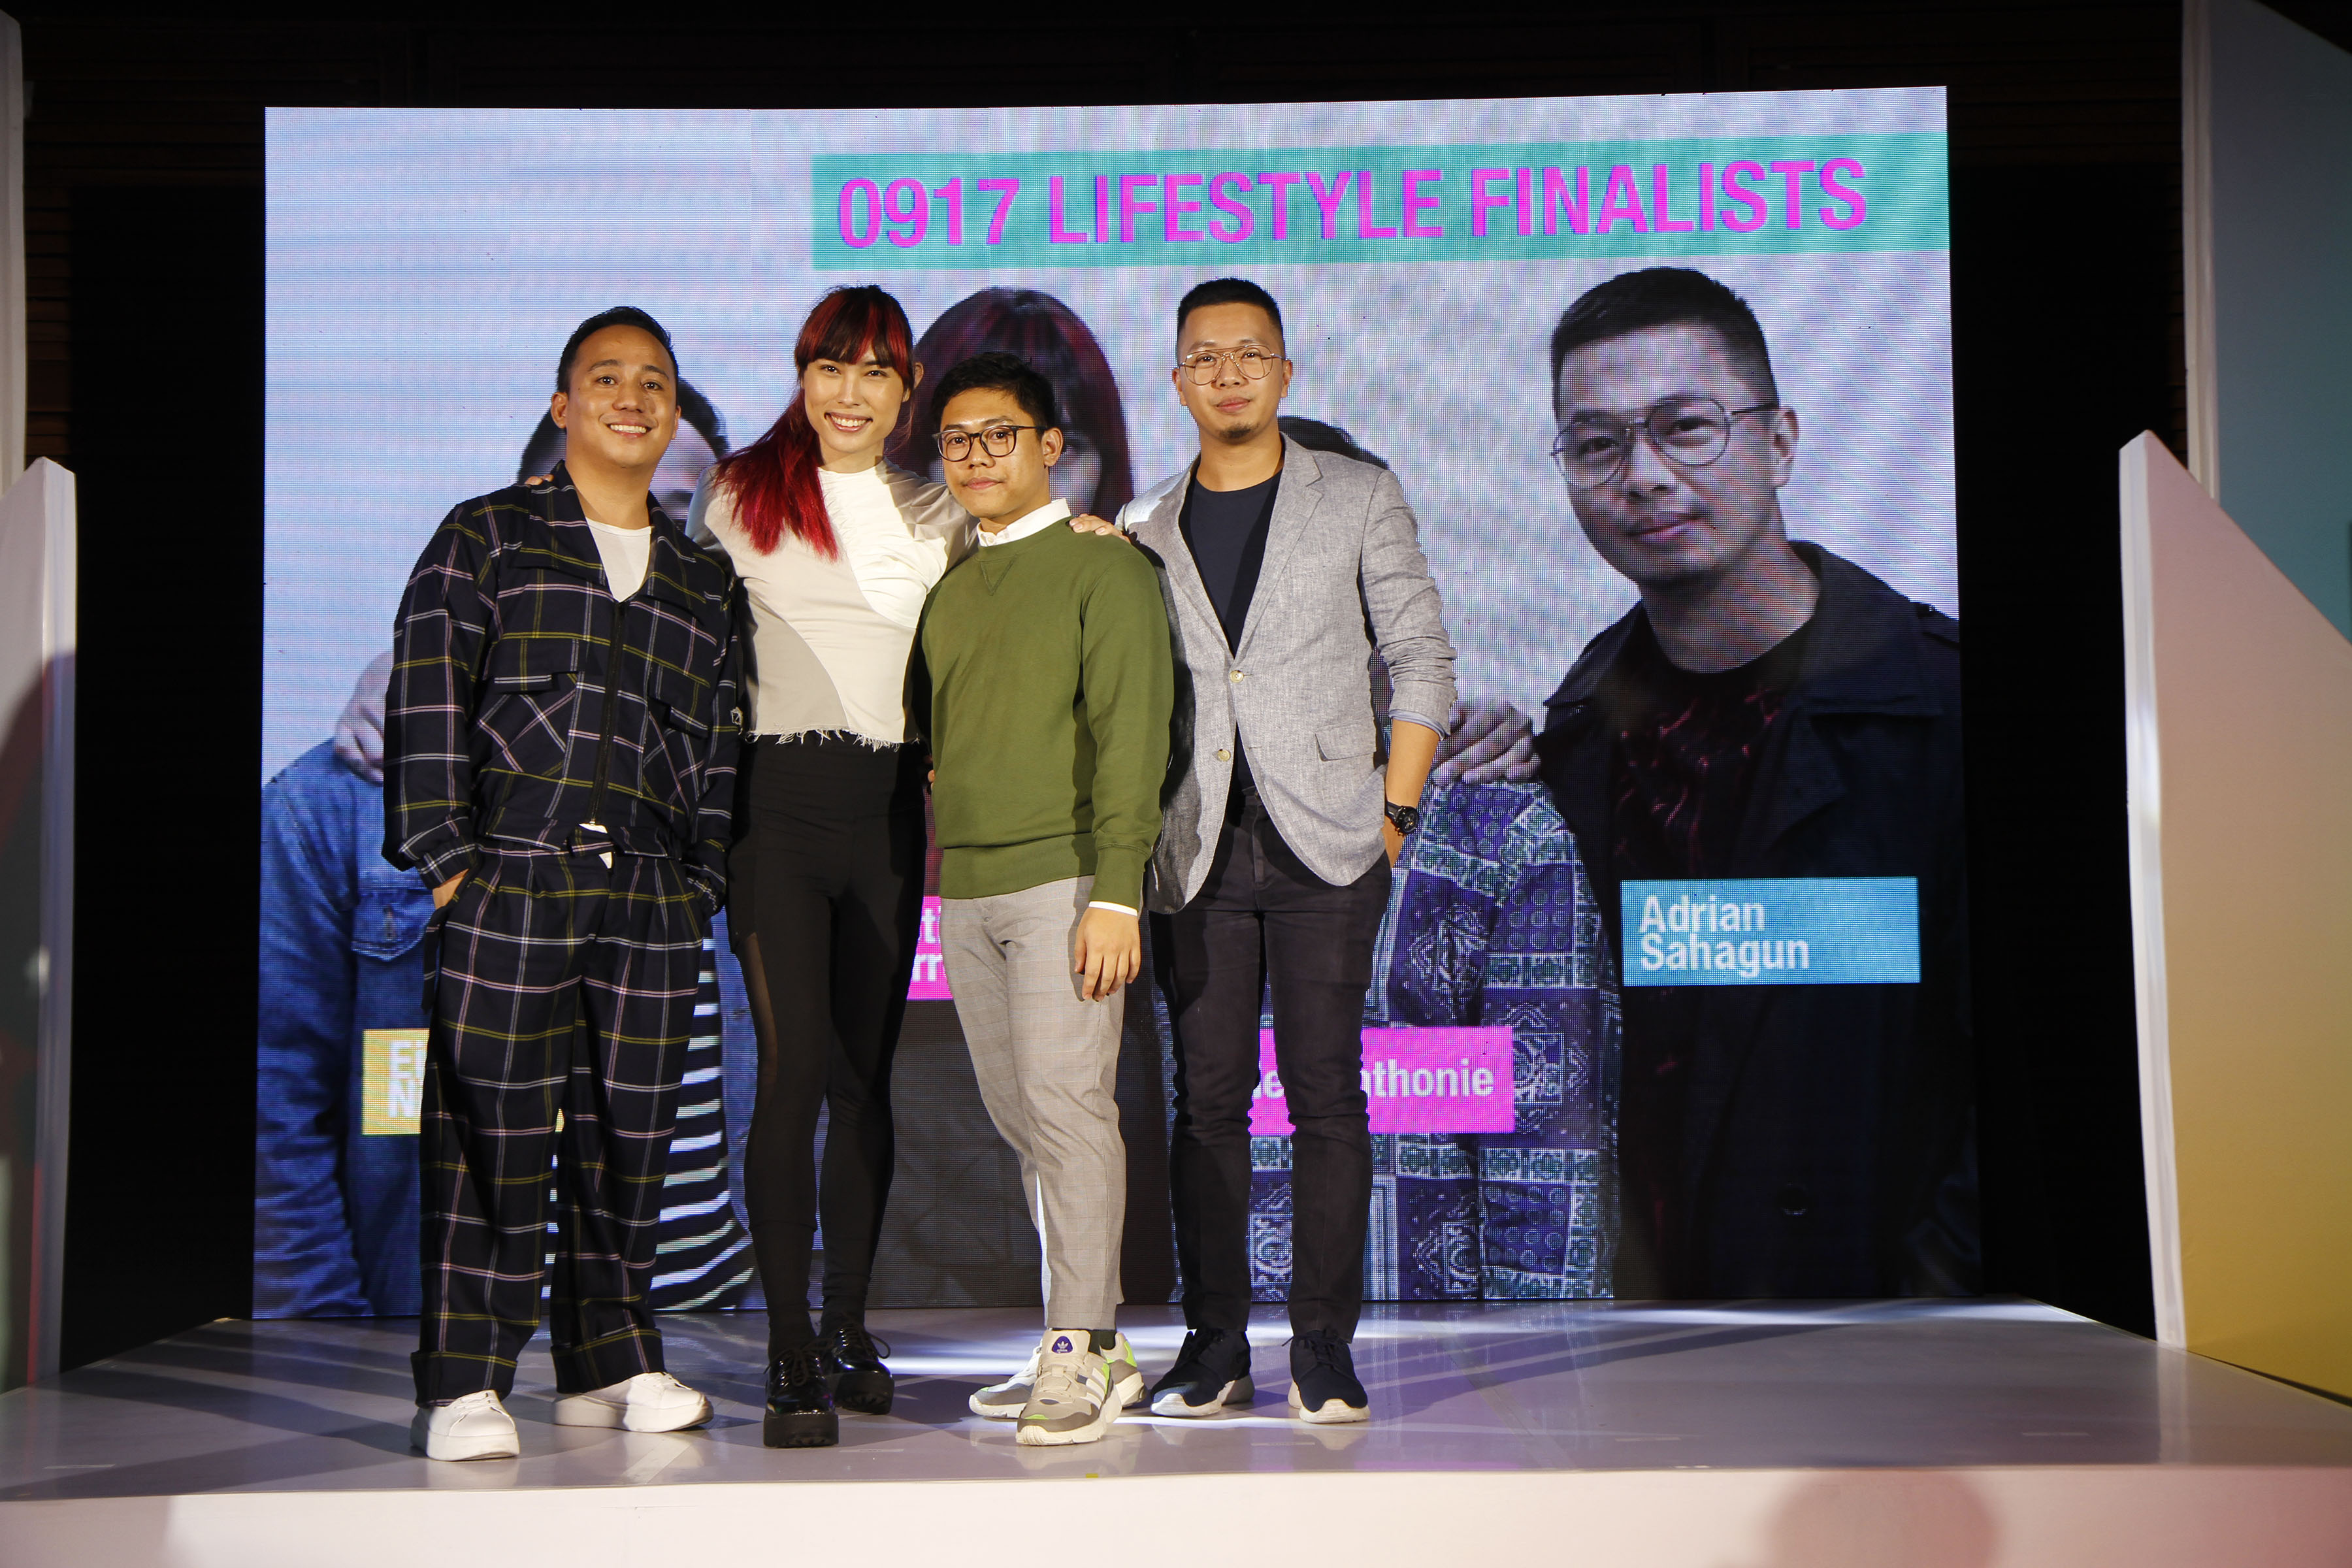 This year's StyleFest PH #0917Lifestyle Finalists